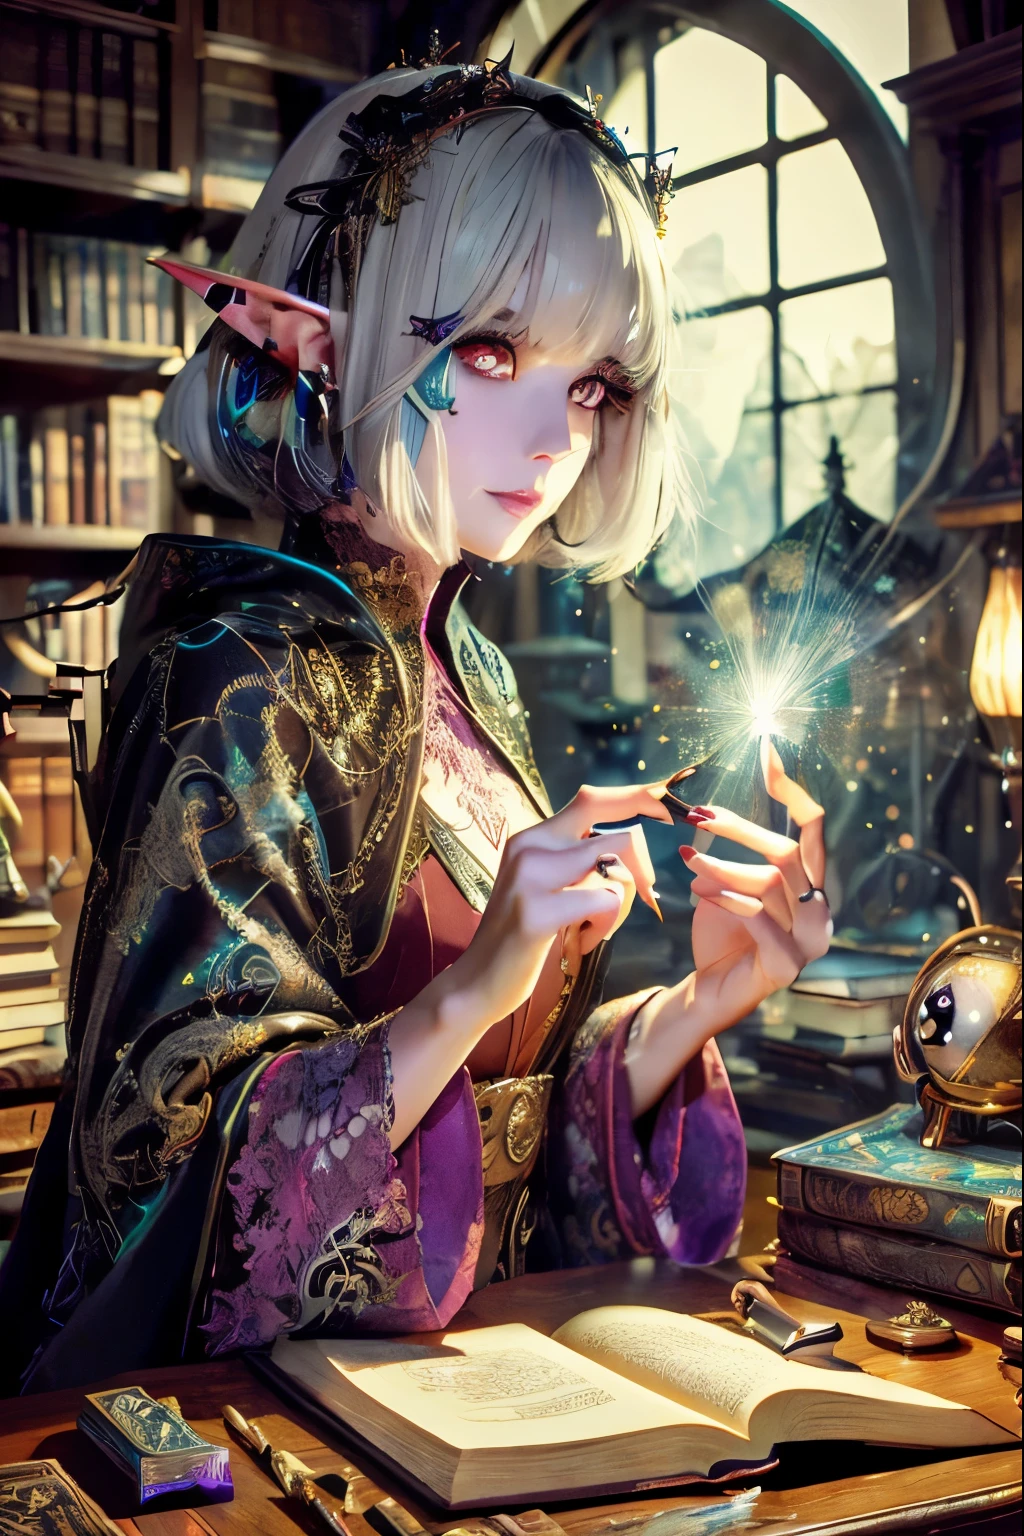 (Ultra-detailed face, open mouth), (Fantasy Illustration with Gothic & Ukiyo-e & Comic Art), (Full Body, A middle-aged dark elf woman with white hair, blunt bangs, very long disheveled hair, and dark purple skin, lavender eyes), (She is wearing a gorgeous wizard's robe of red silk with lace for women and thin black leather woven sandals), She peers through a magnifying glass at a sparkling, burning, magical clockwork artifact on a large wooden desk and examines it intently), BREAK (Ancient artifacts that look like junk are lying in disarray in the background, and bookshelves are crammed with books of magic)